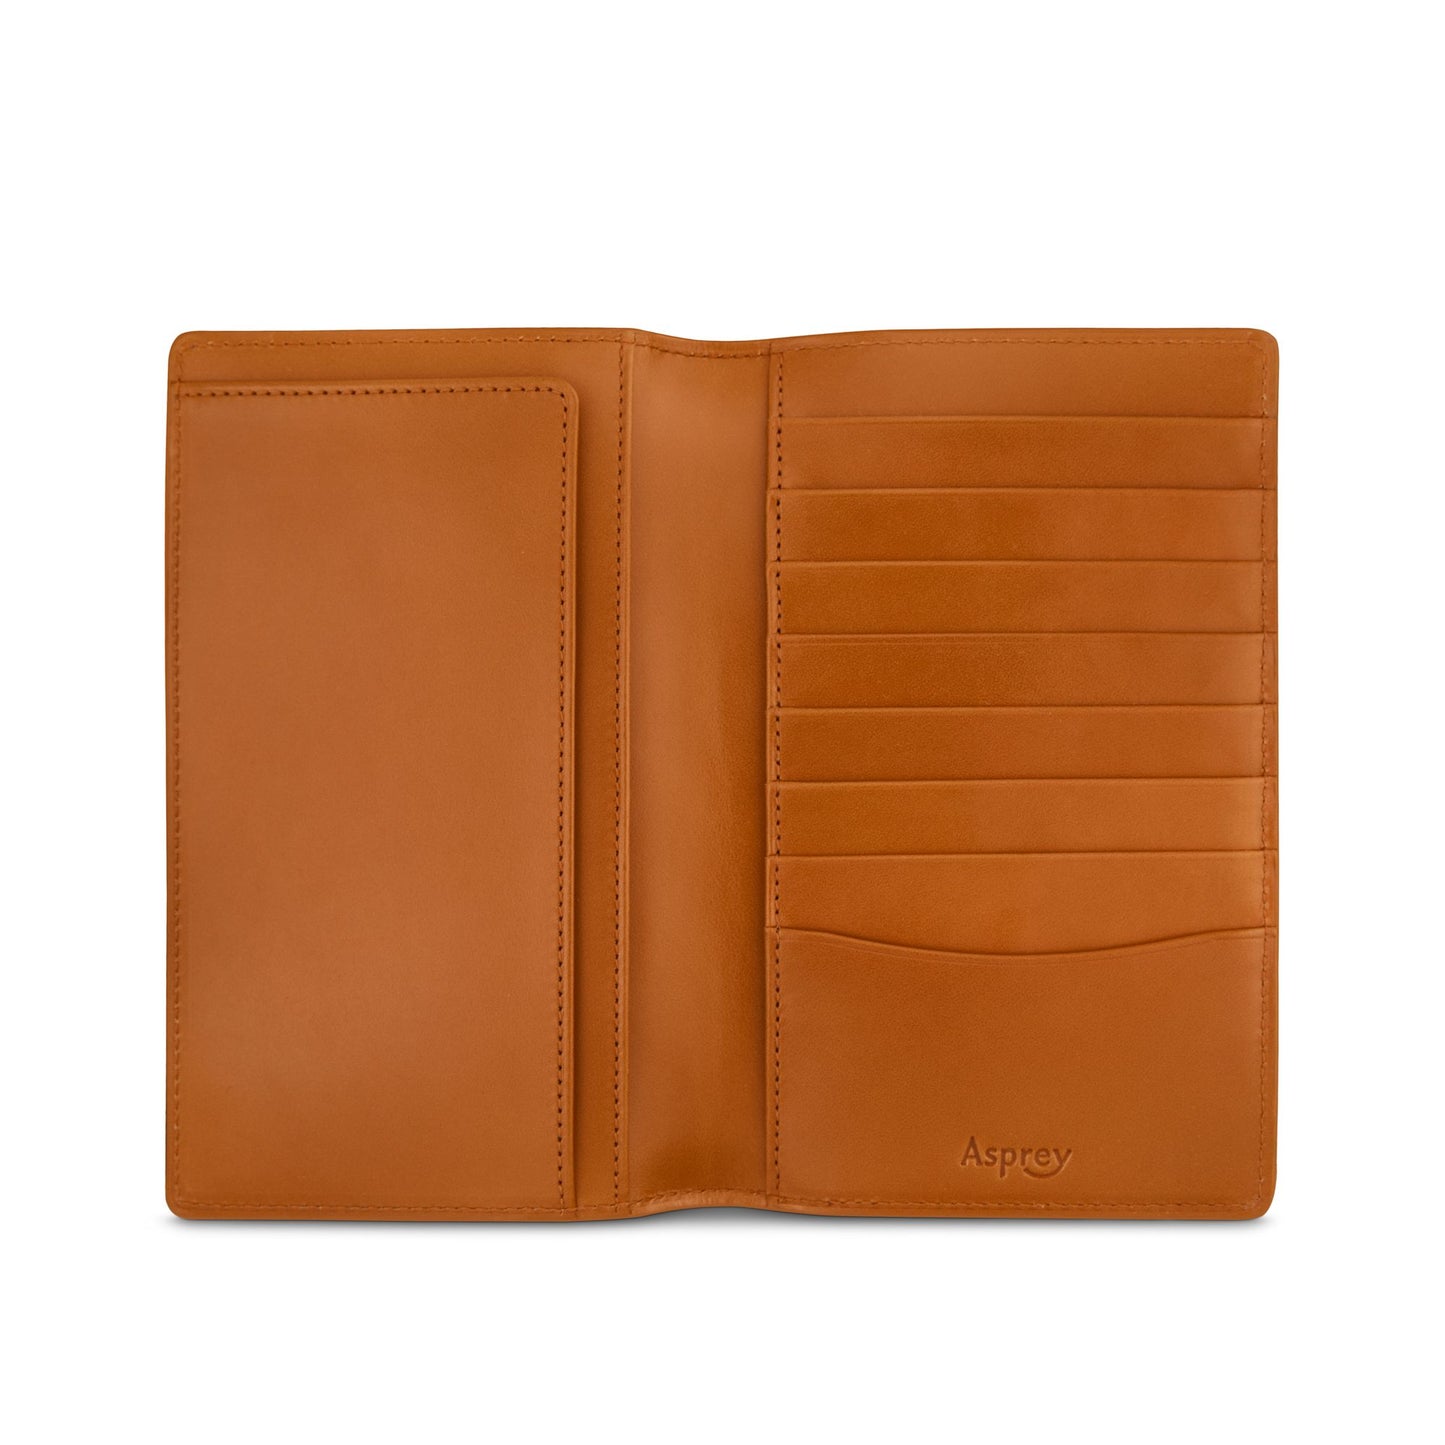 Hanover 8cc Coat Wallet in Saddle Leather